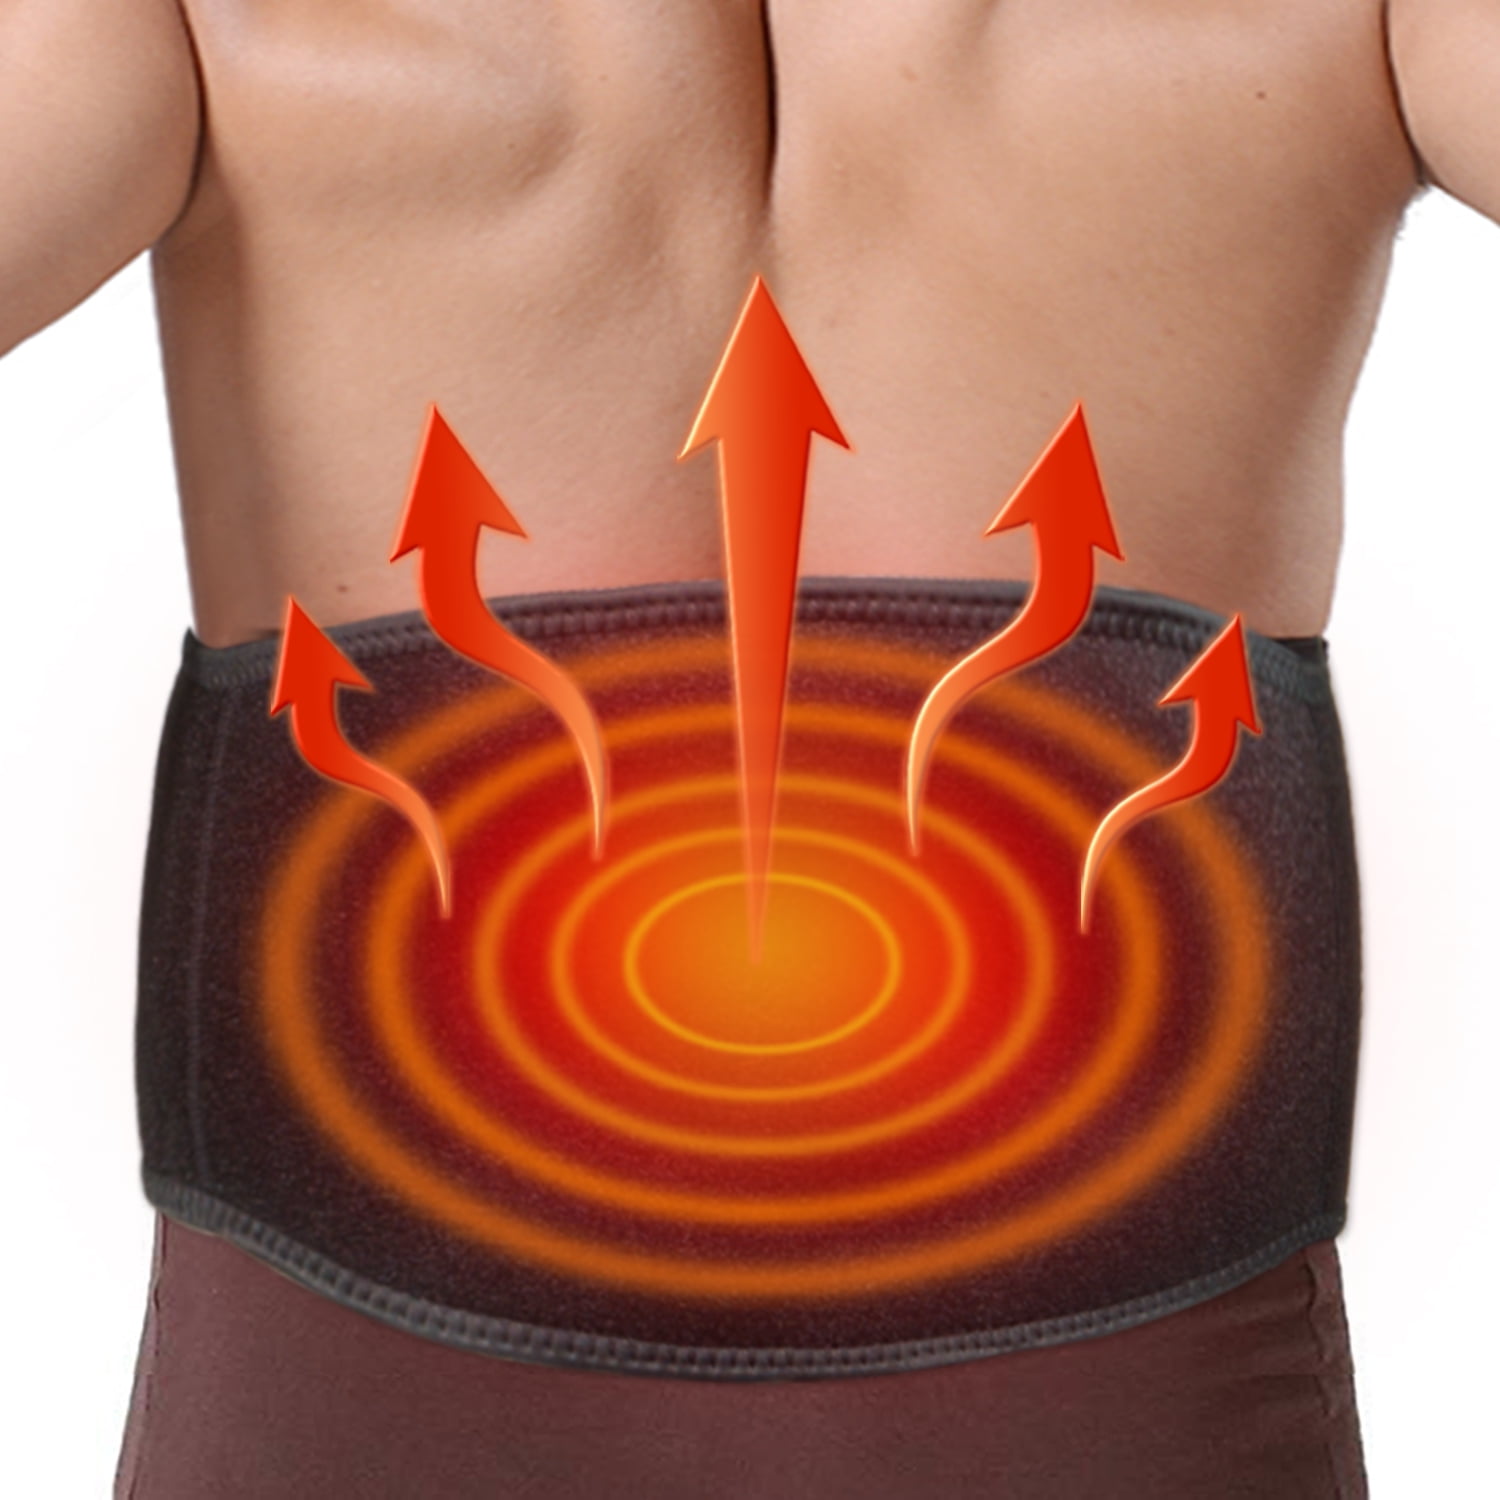 ARRIS Heating Waist Belt Heated Pad Hot Therapy for Lower Back w/ 7.4v ...